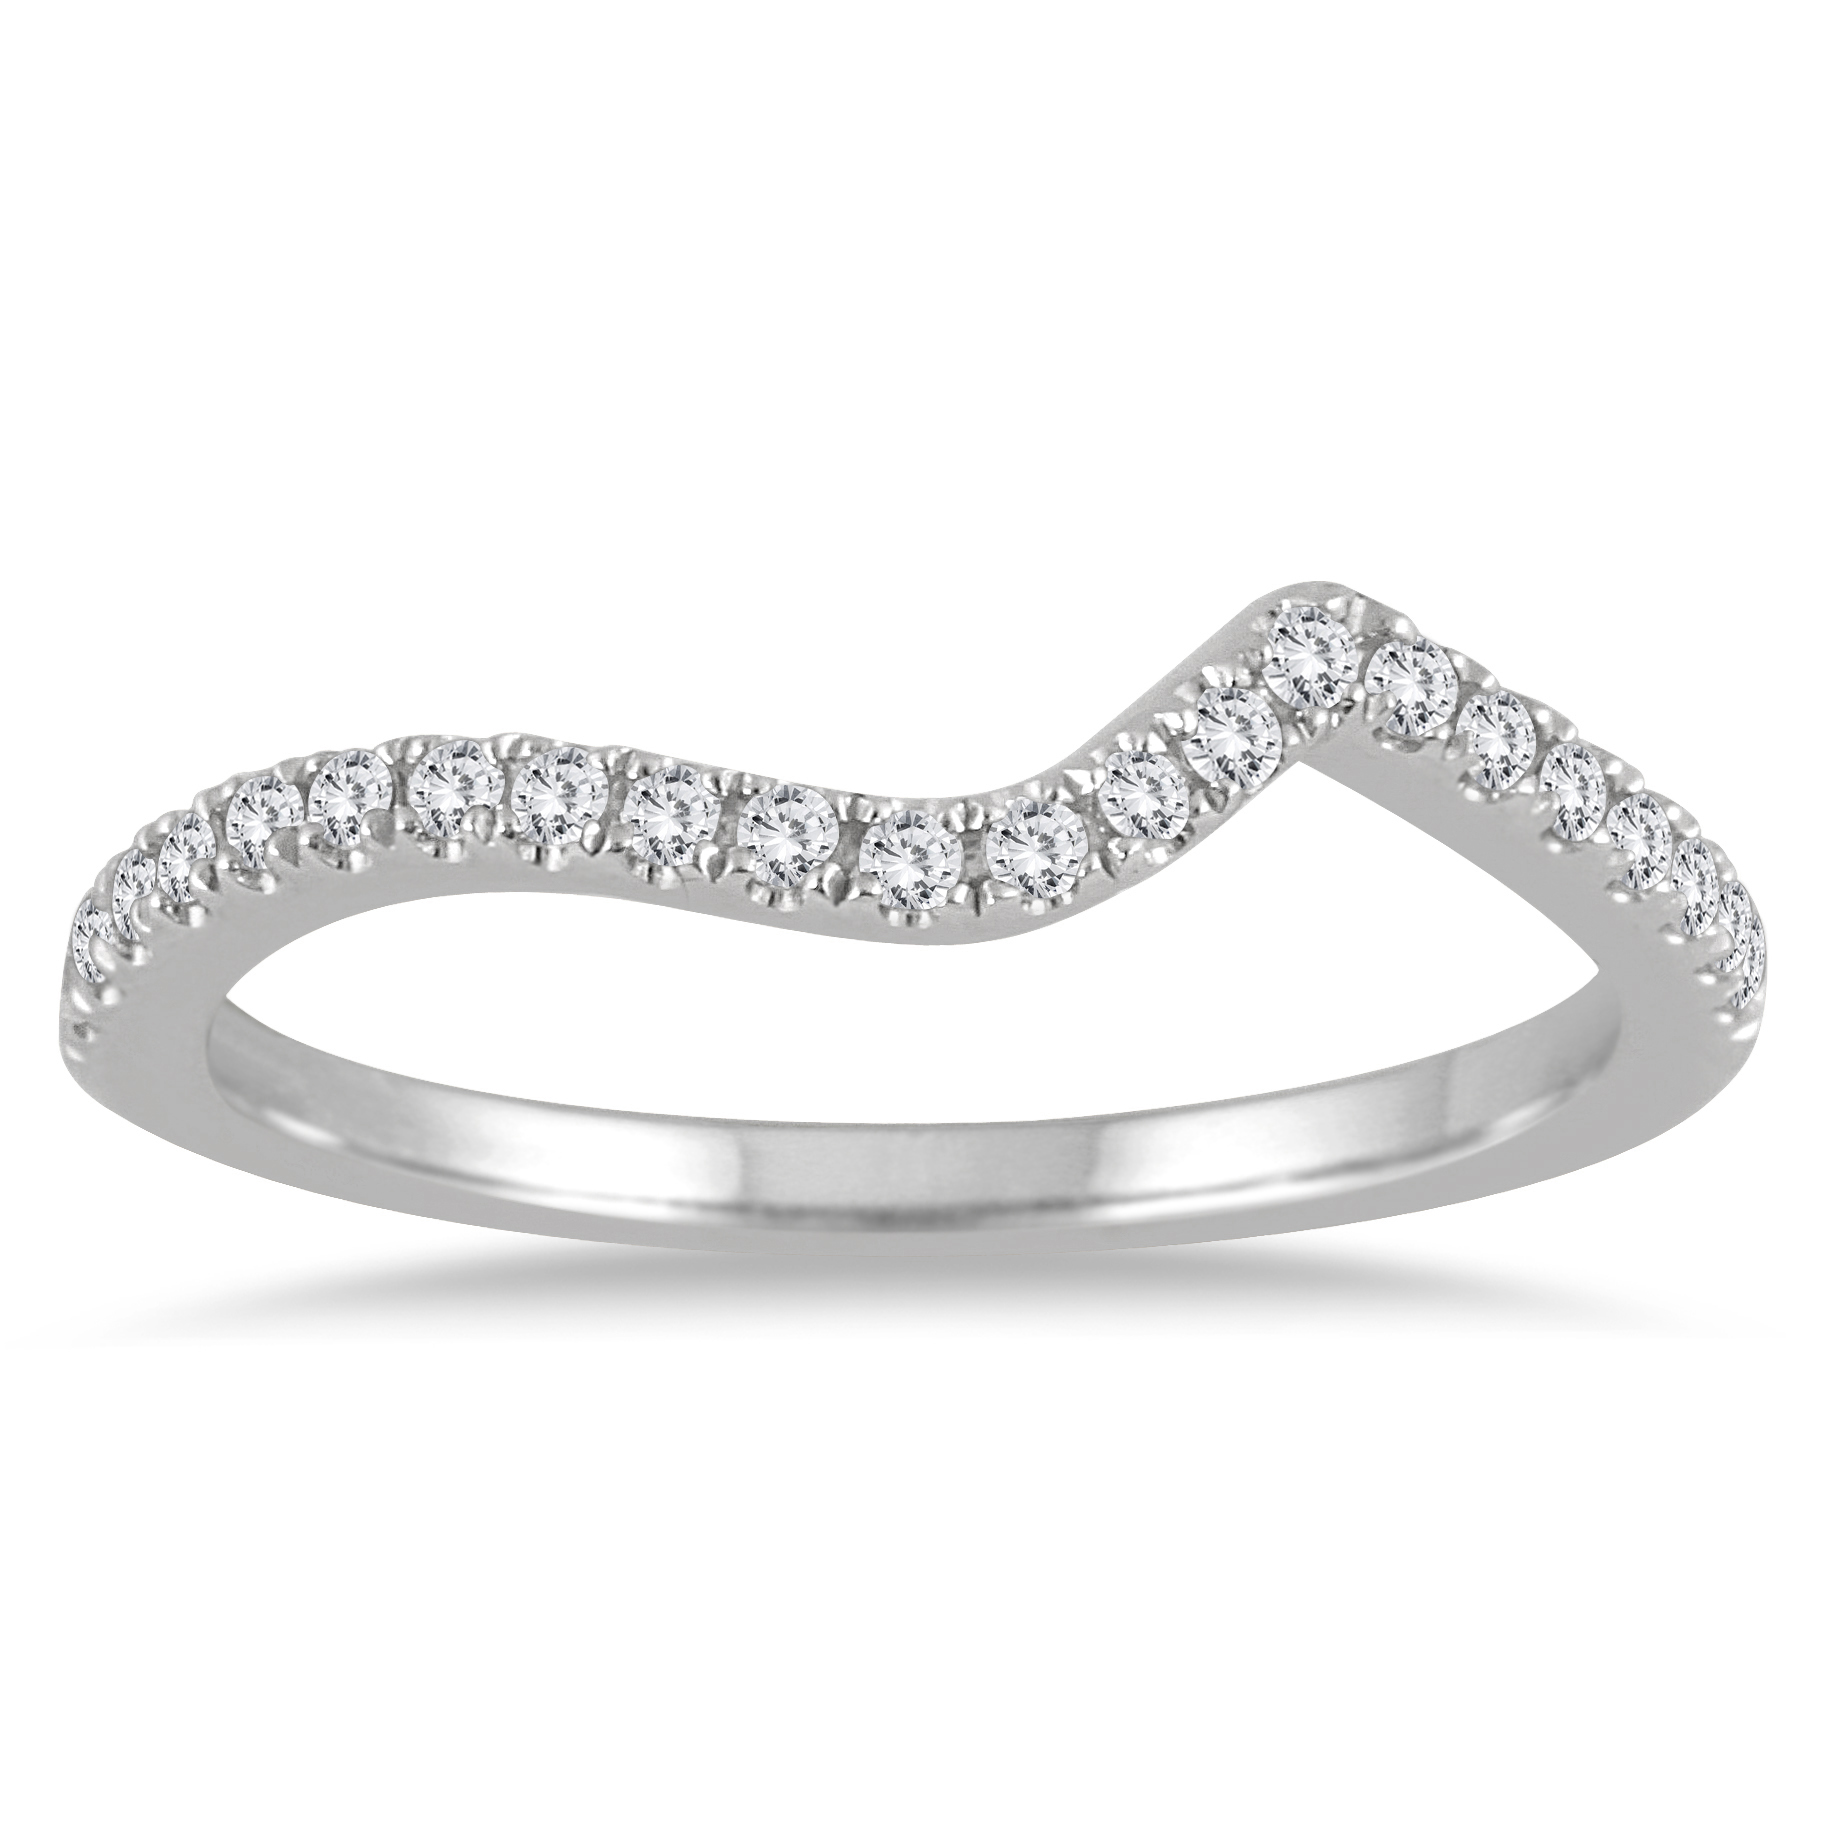 1/6 Carat TW Diamond Curved Wedding Band in 14K White Gold